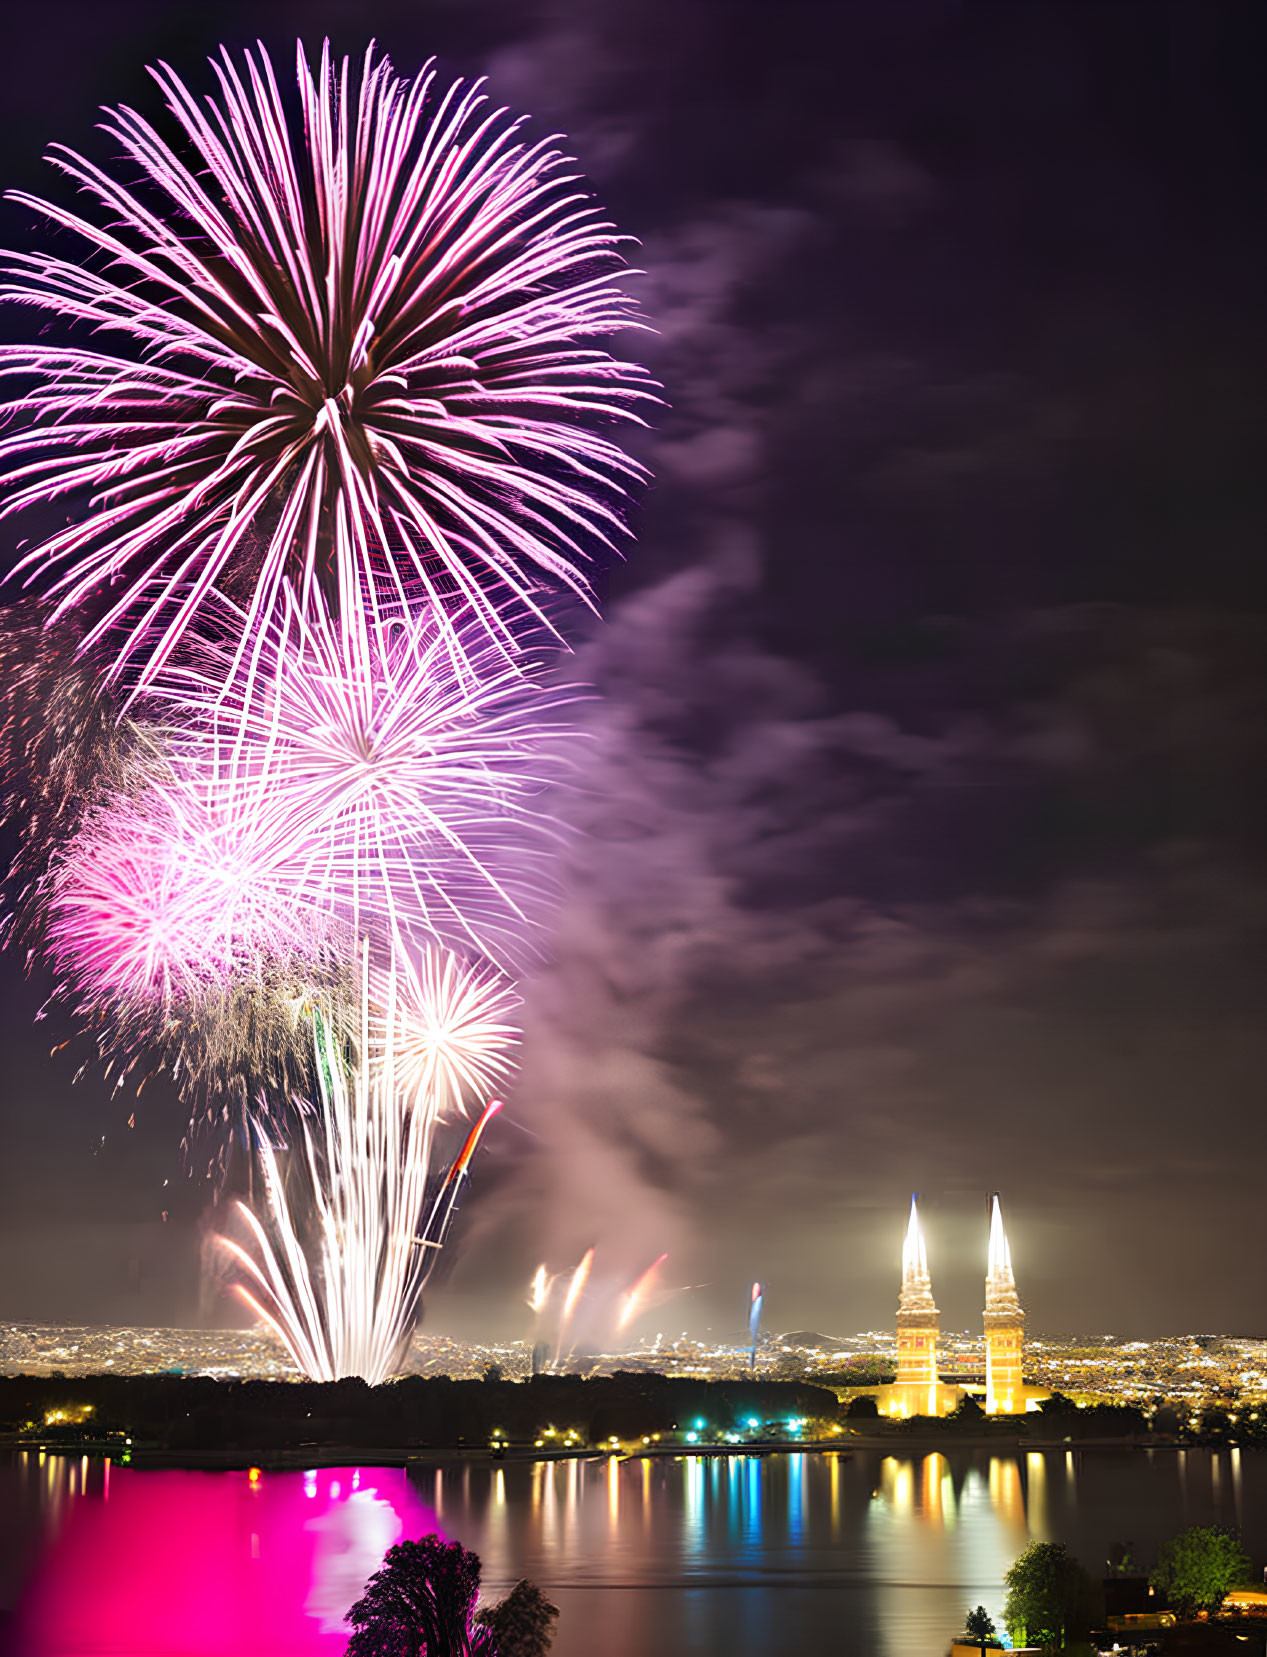 Colorful fireworks light up night cityscape with illuminated towers and reflections on water